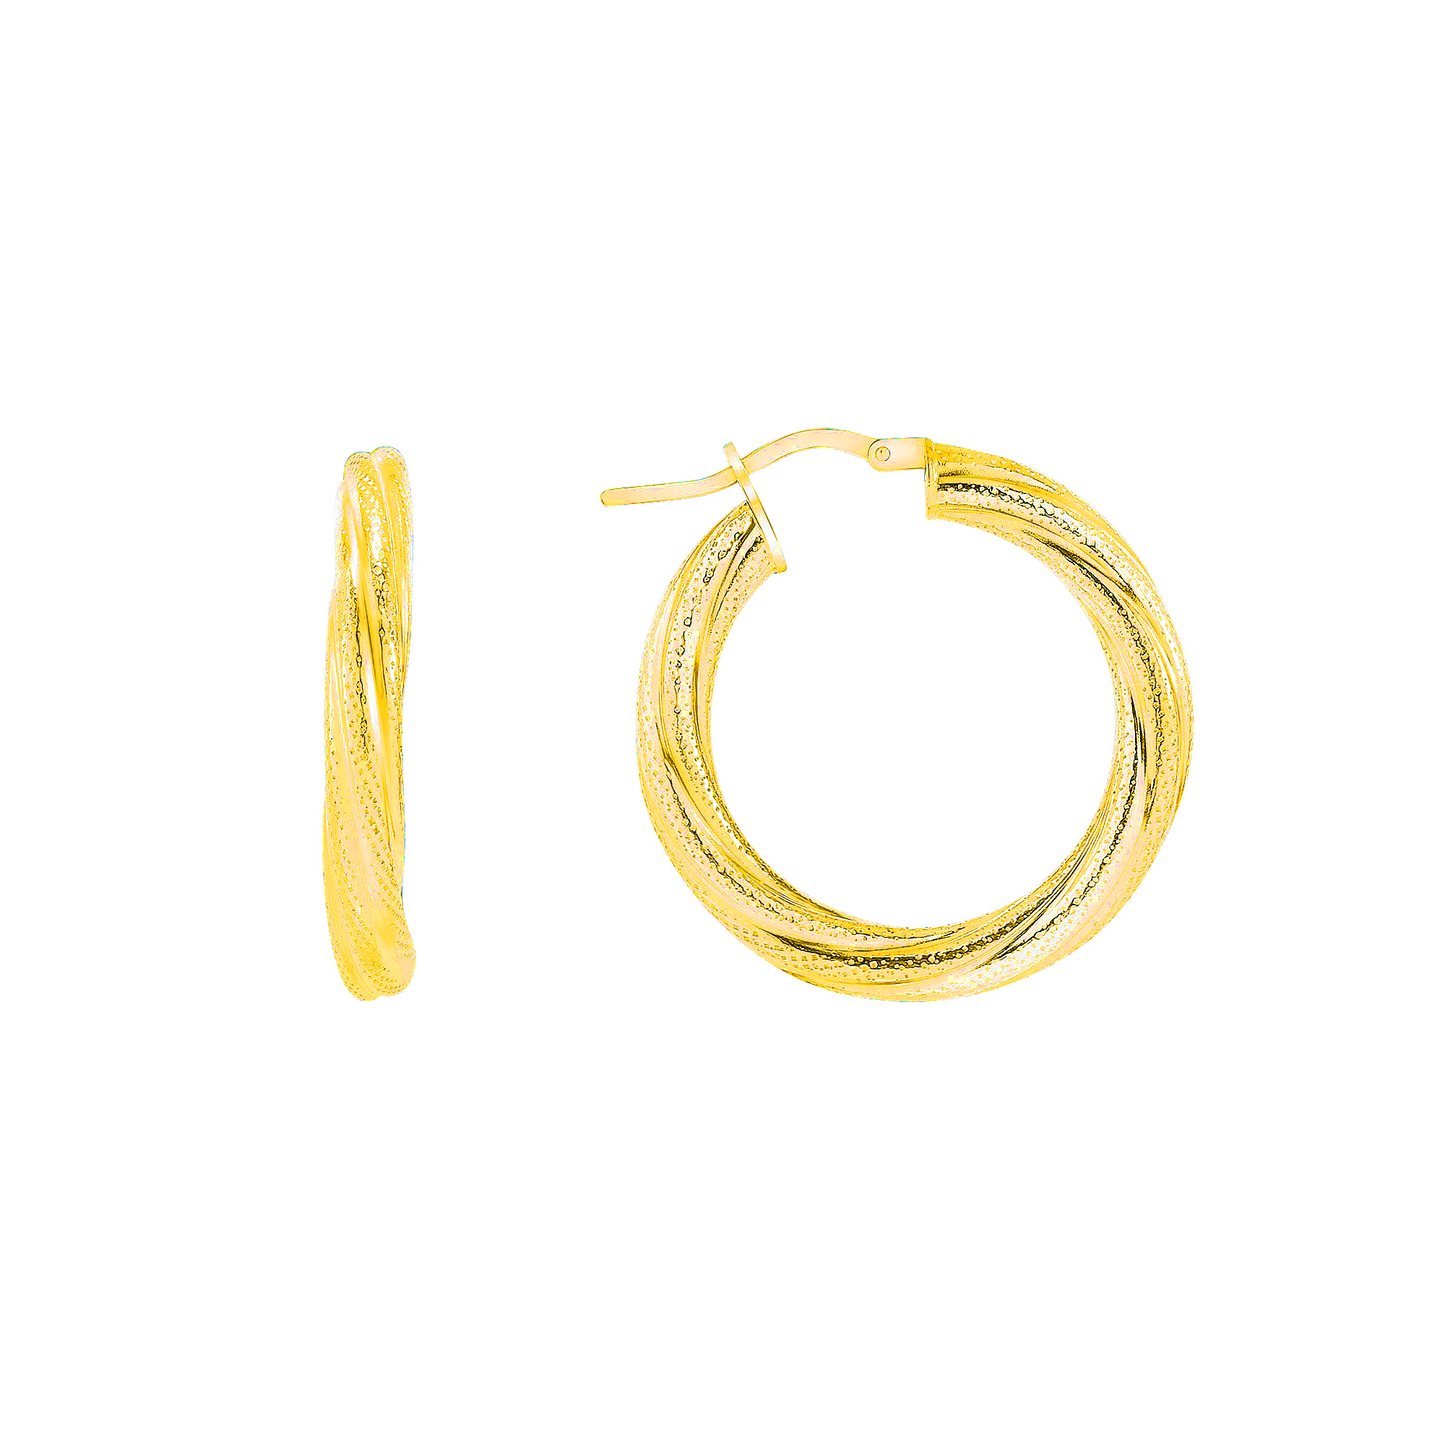 Silver 925 Gold Plated 15 mm. Twisted Hoop Earring. ITHP139-15MG